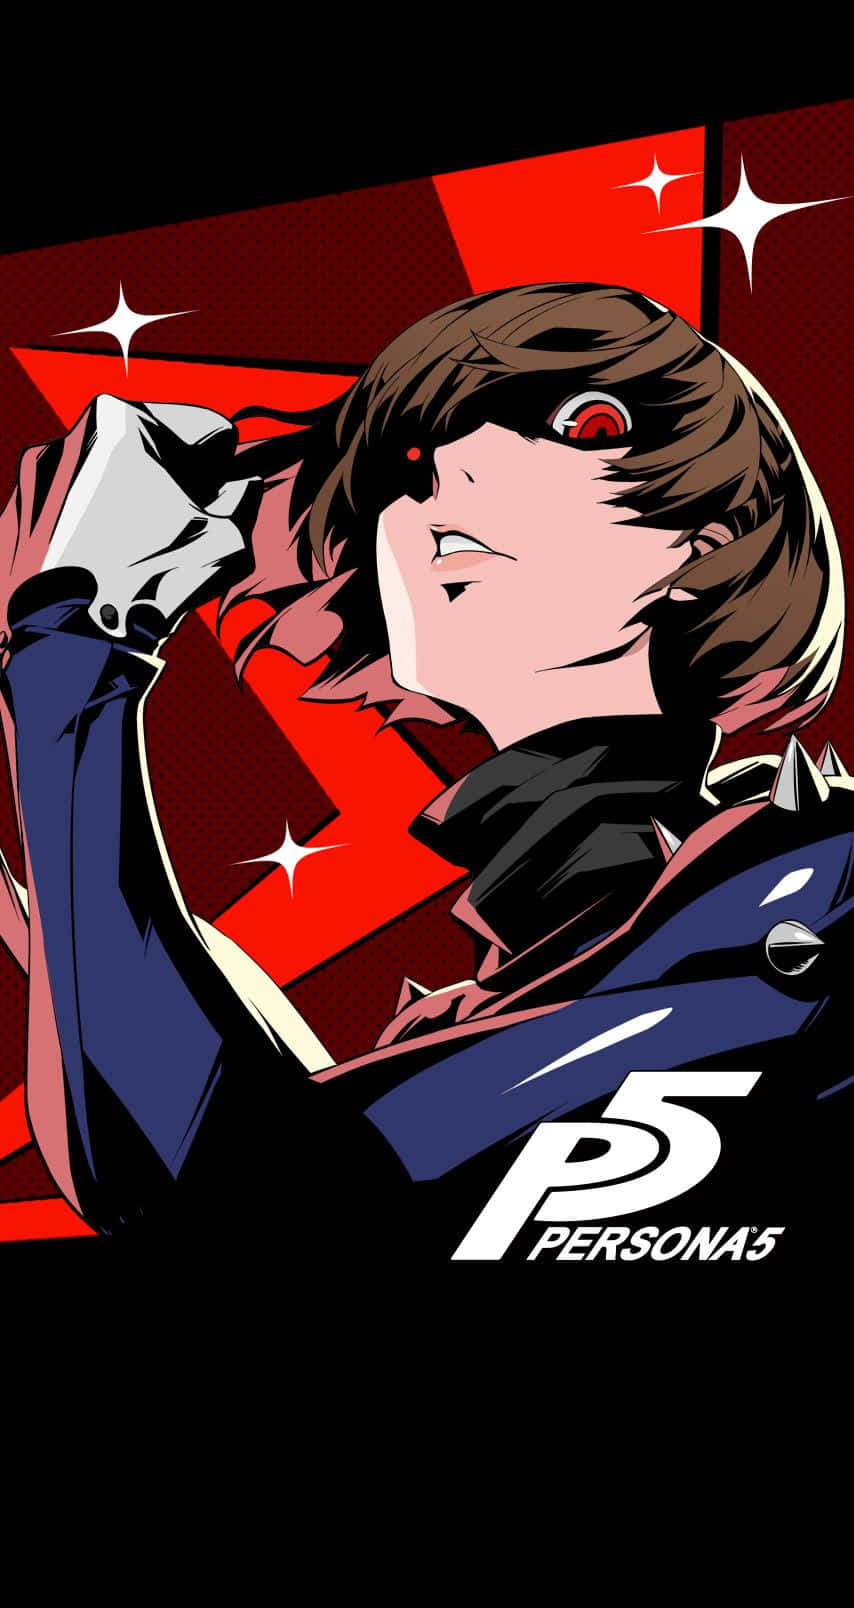 "Take Control of Your Destiny with Joker Persona 5" Wallpaper